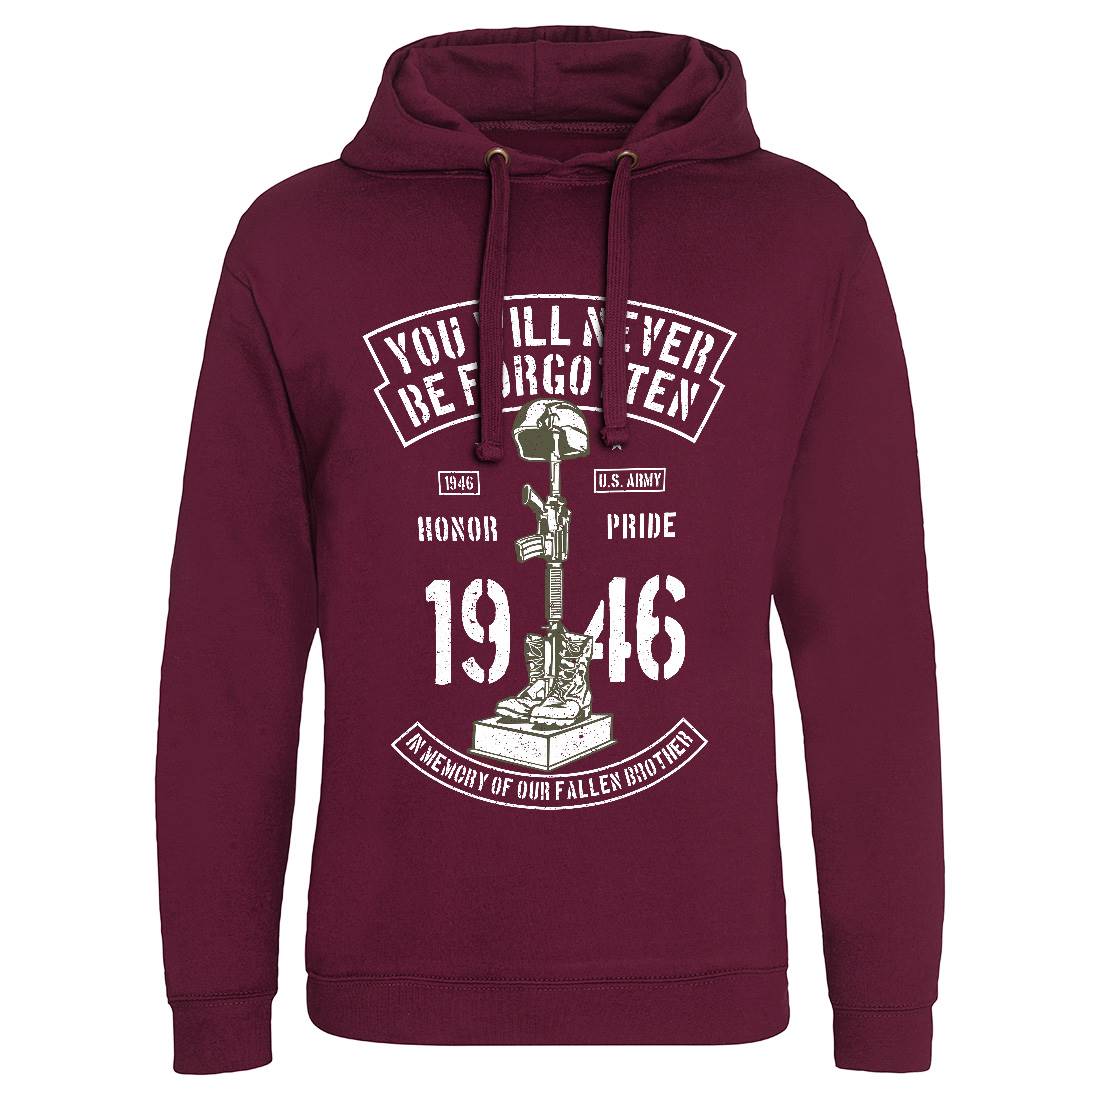 You Will Never Be Forgotten Mens Hoodie Without Pocket Army A800